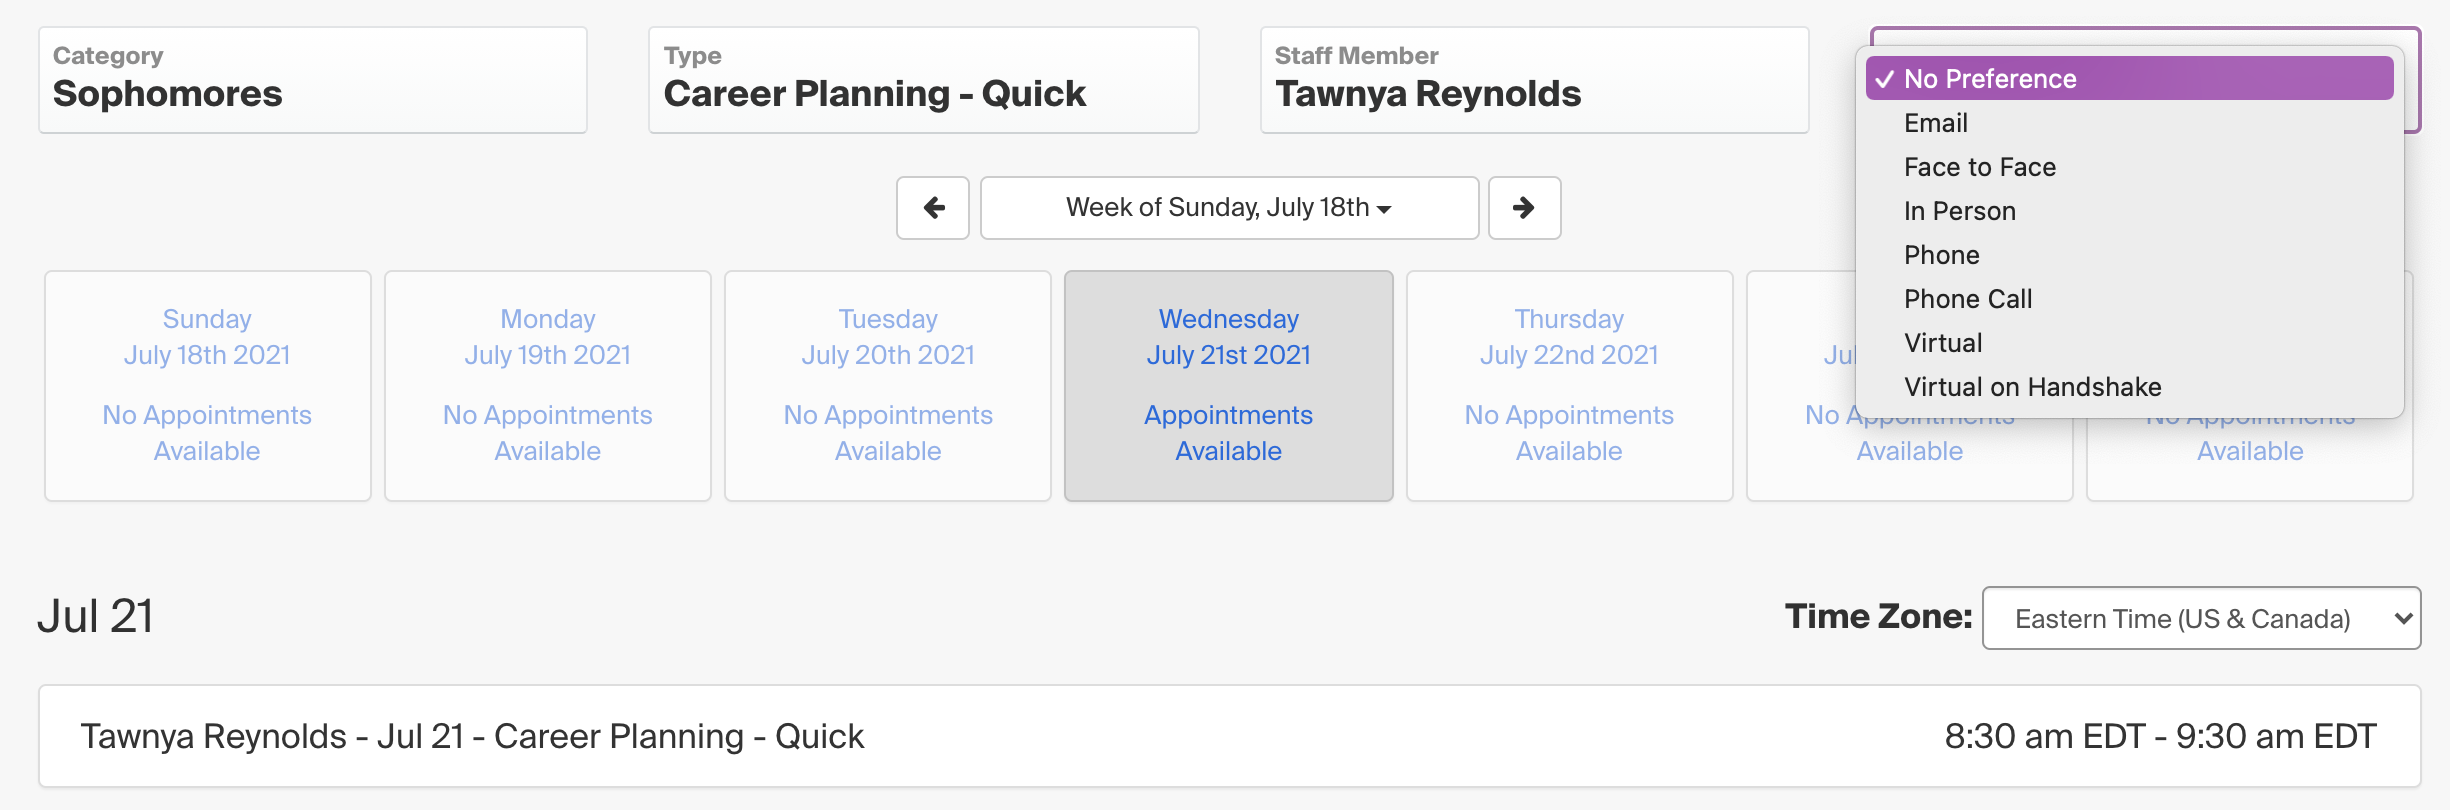 appointment_scheduling_page.png